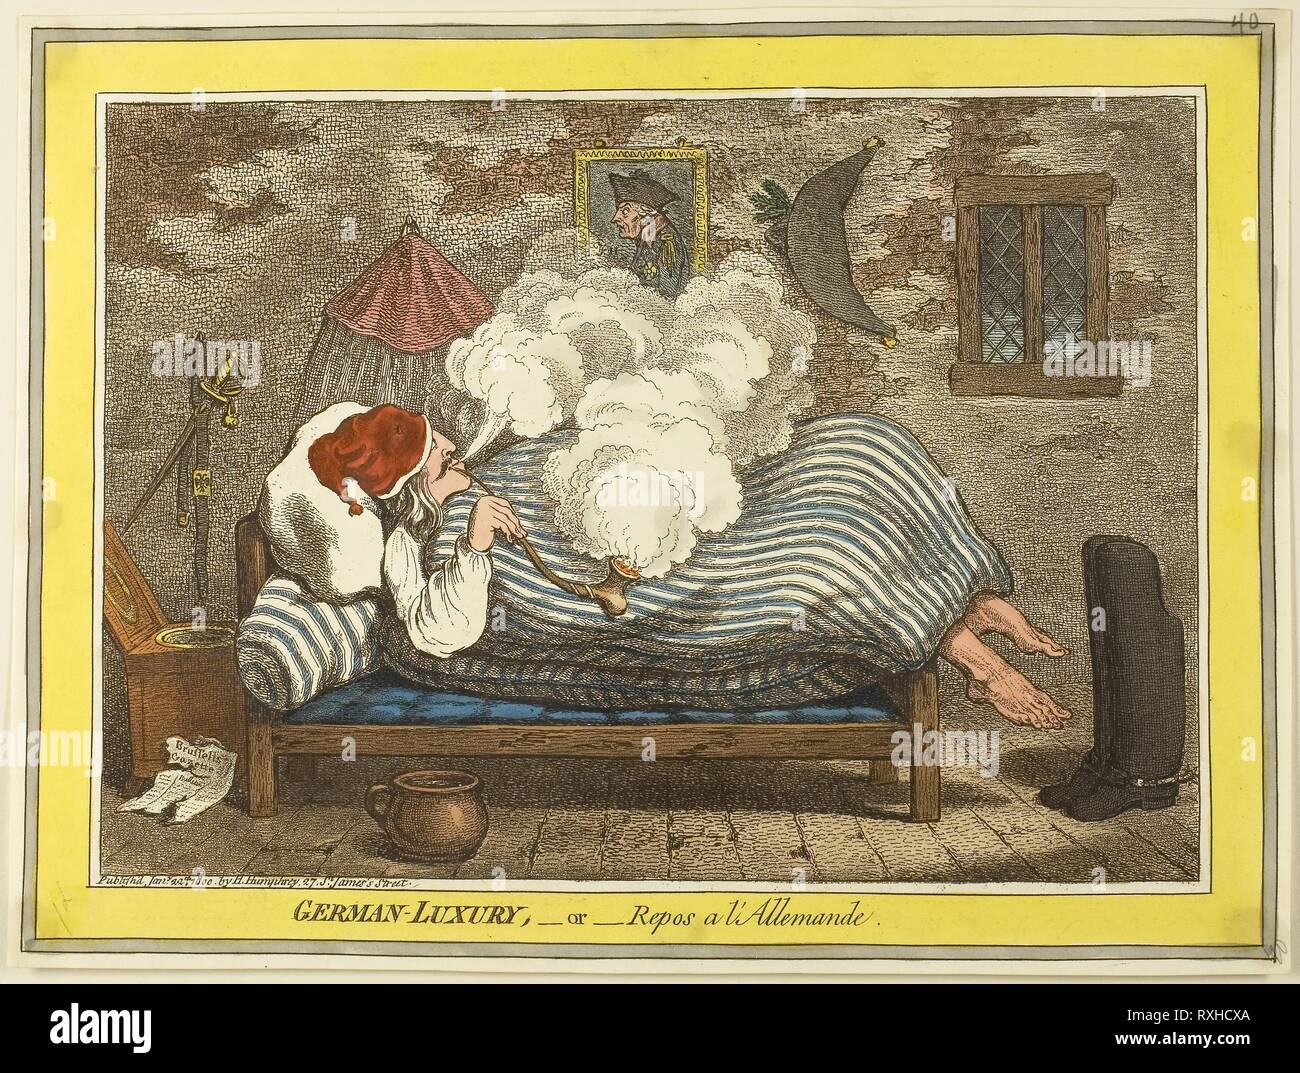 German Luxury. James Gillray (English, 1756-1815); published by Hannah Humphrey (English, c. 1745-1818). Date: 1800. Dimensions: 230 x 310 mm (image); 240 x 320 mm (sheet). Hand-colored etching on paper. Origin: England. Museum: The Chicago Art Institute. Stock Photo